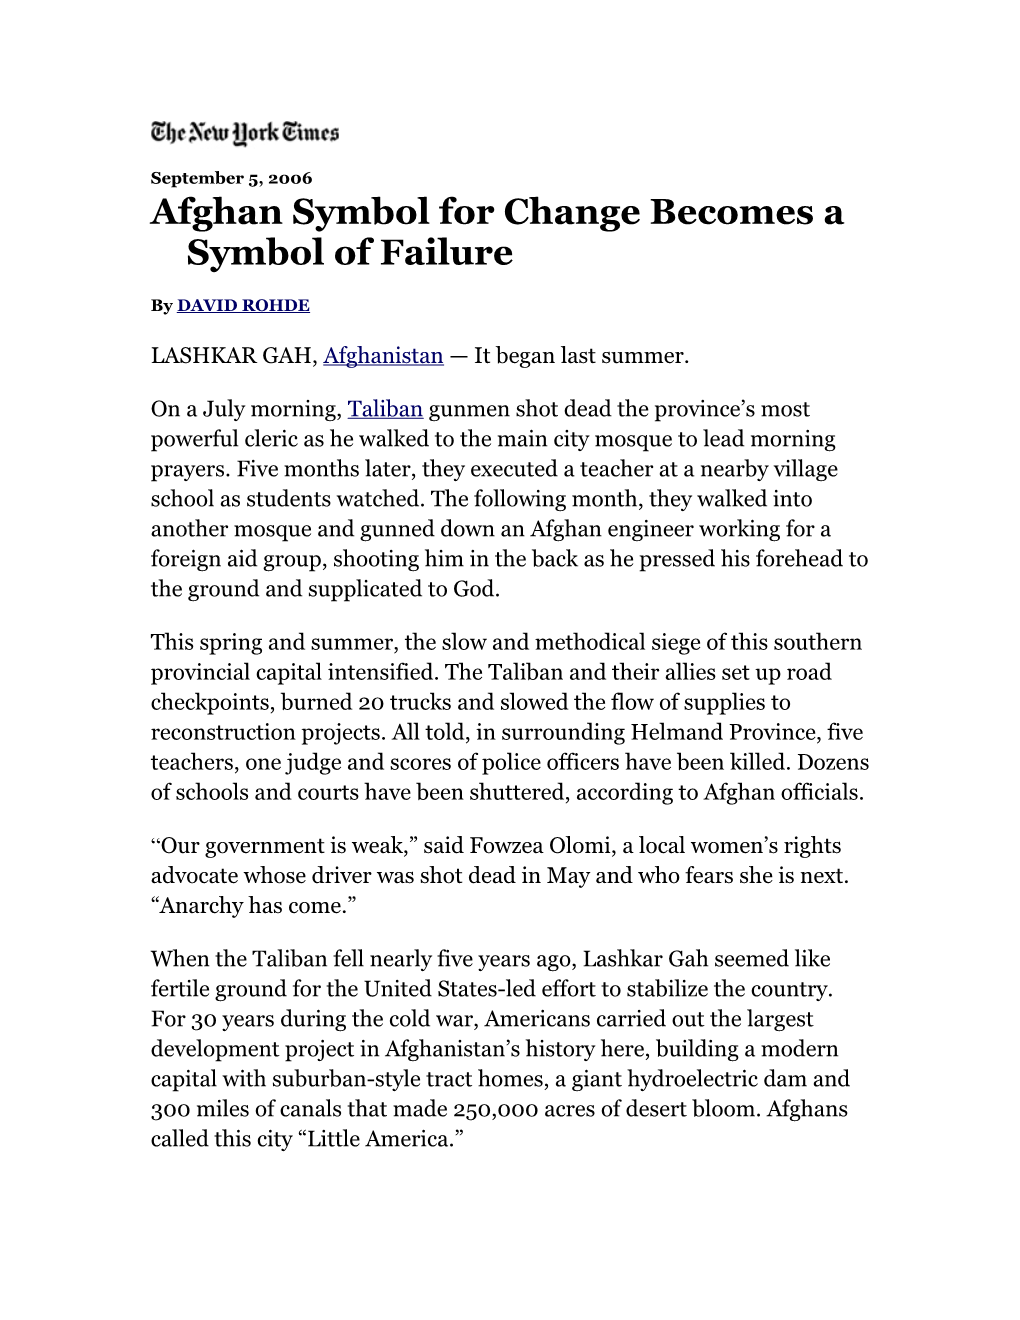 Afghan Symbol for Change Becomes a Symbol of Failure